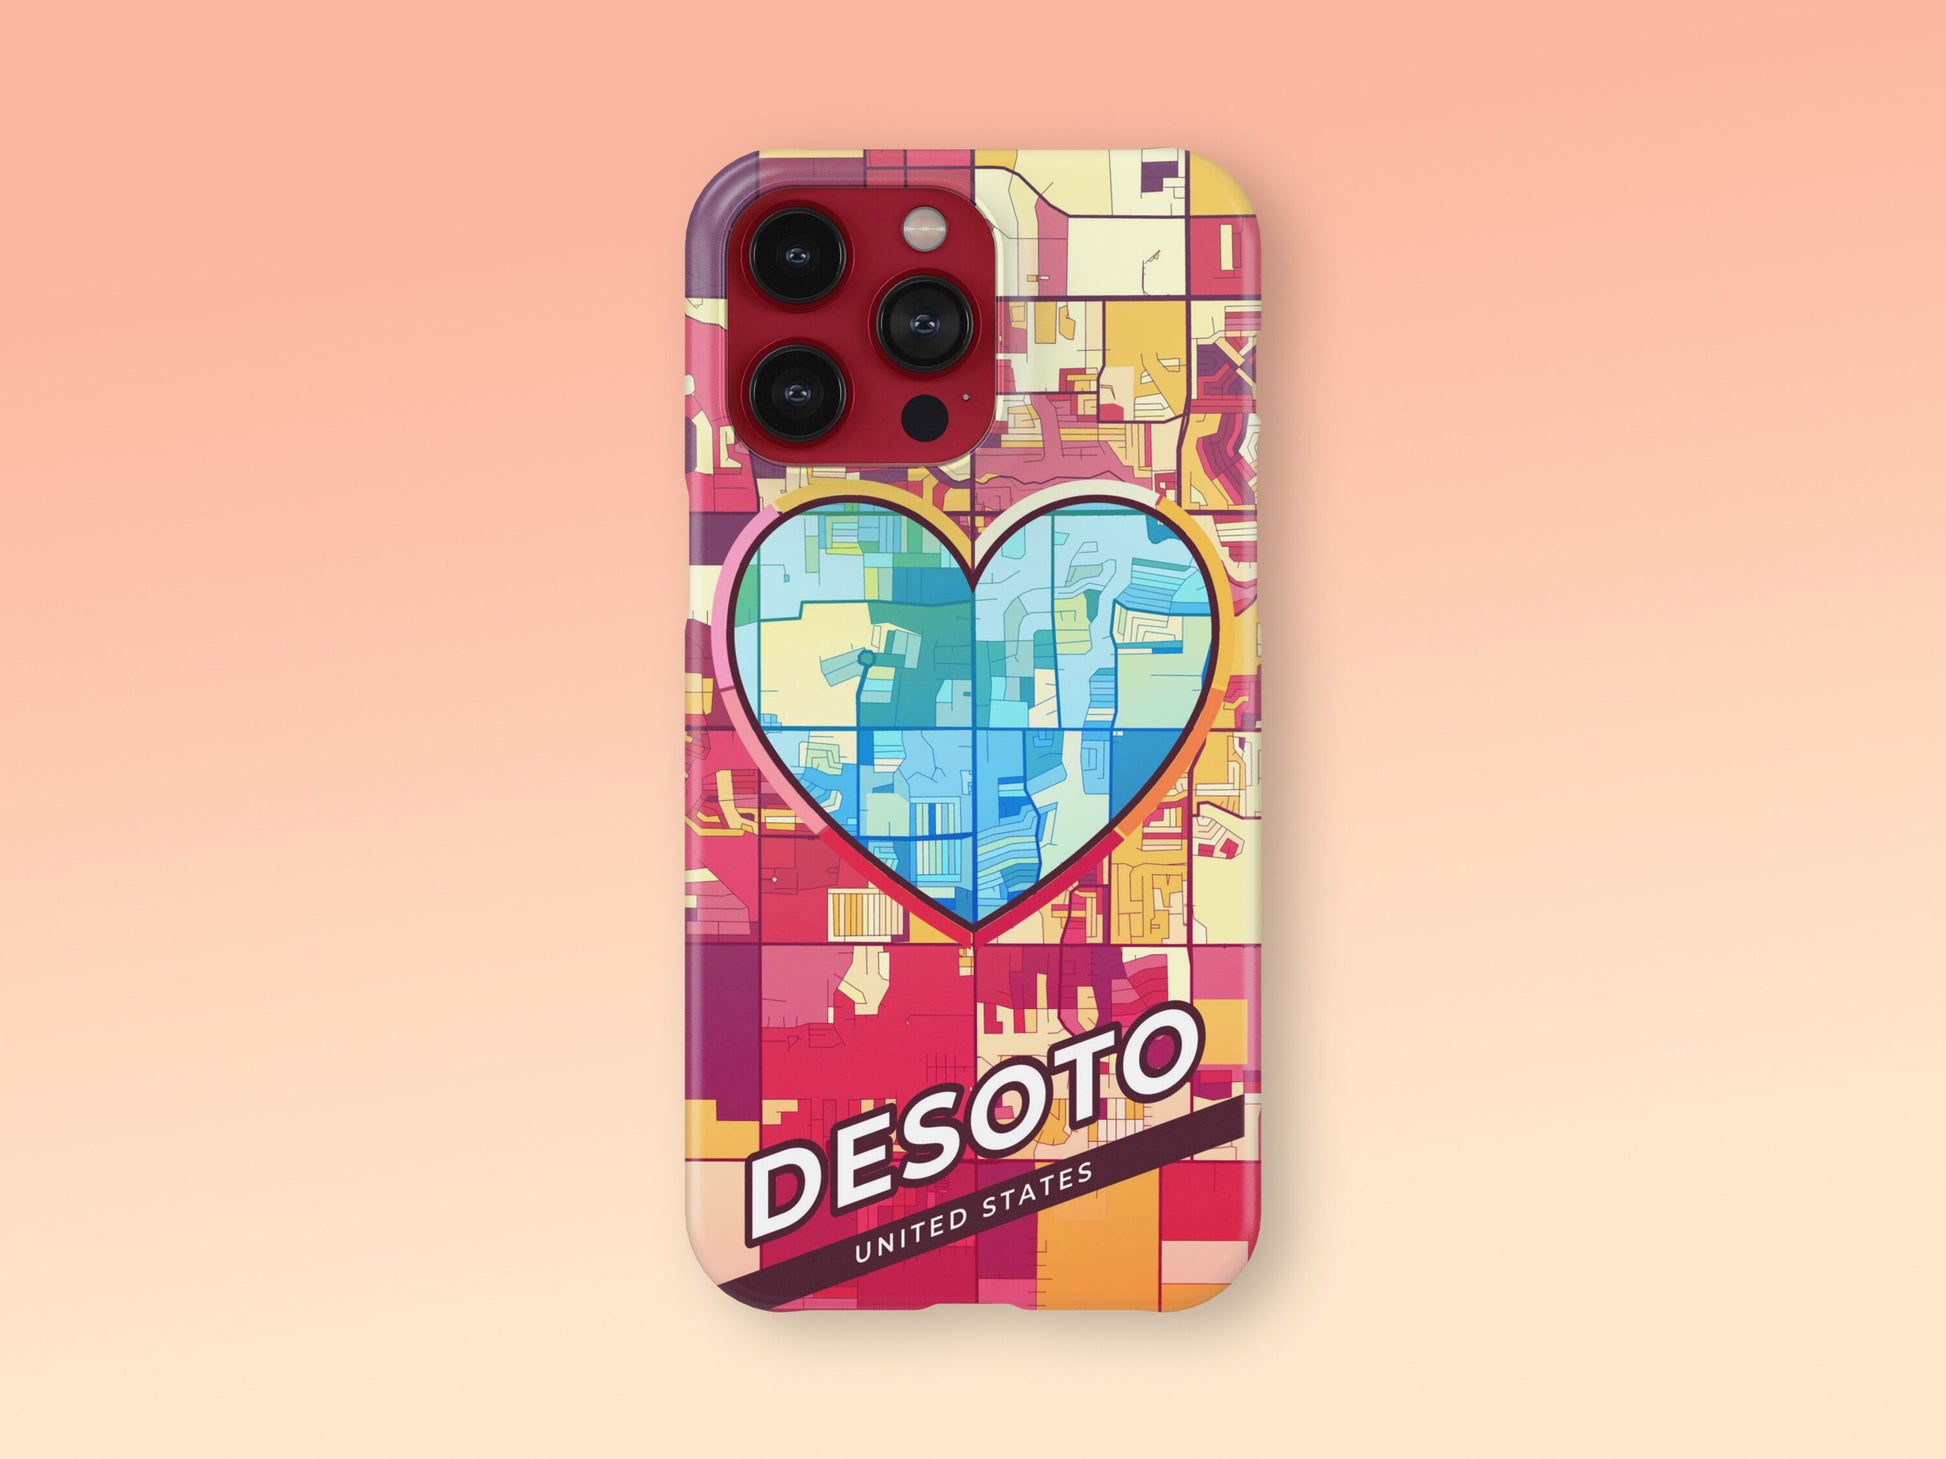 Desoto Texas slim phone case with colorful icon. Birthday, wedding or housewarming gift. Couple match cases. 2